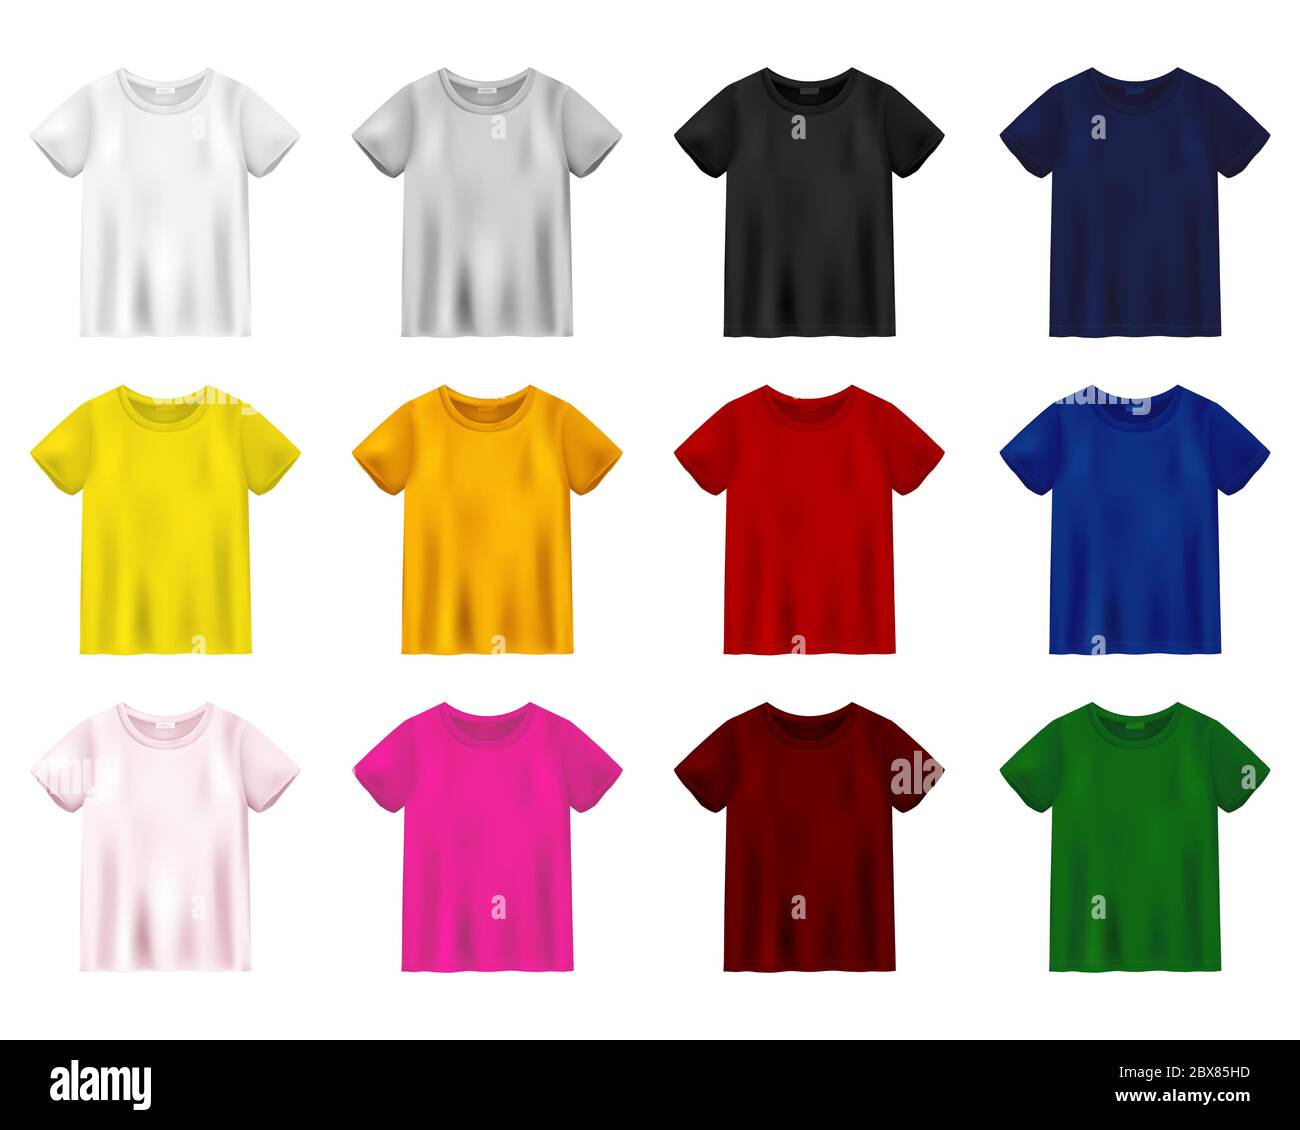 Download Set Of T Shirt Mockup Isolated On White Background Unisex Tee Template Black Red Blue Yellow Pink Orange Grey Green White And Brown Version Stock Vector Image Art Alamy